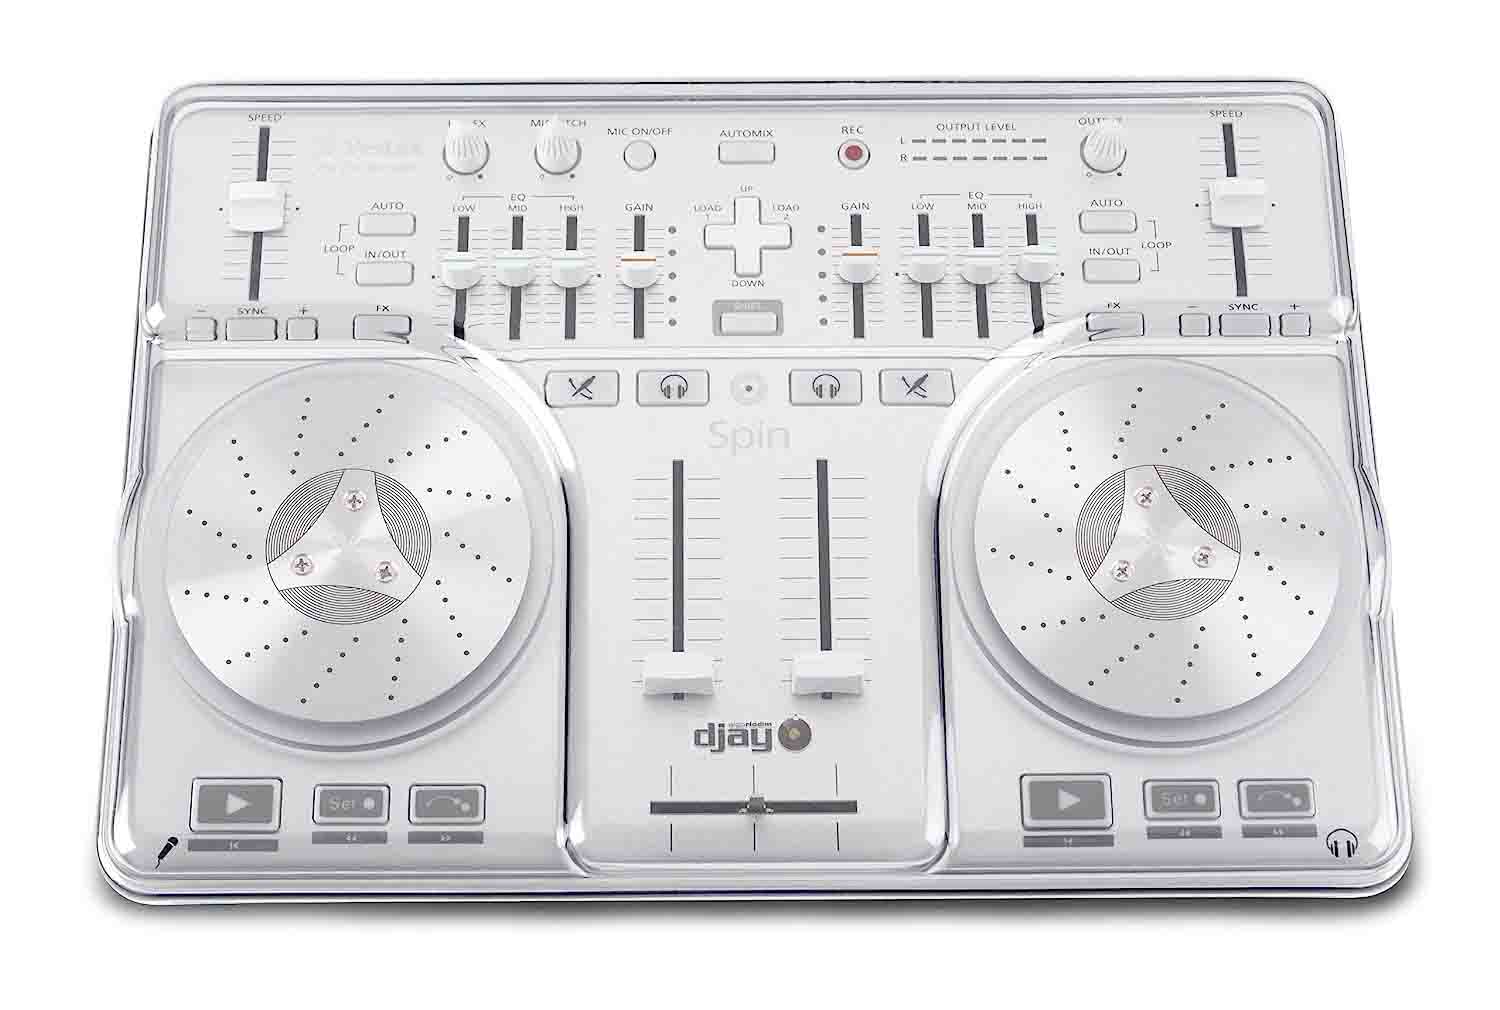 B-Stock: Decksaver DS-PC-SPIN Protective Cover for Vestax Typhoon & Spin DJ Controllers - Hollywood DJ